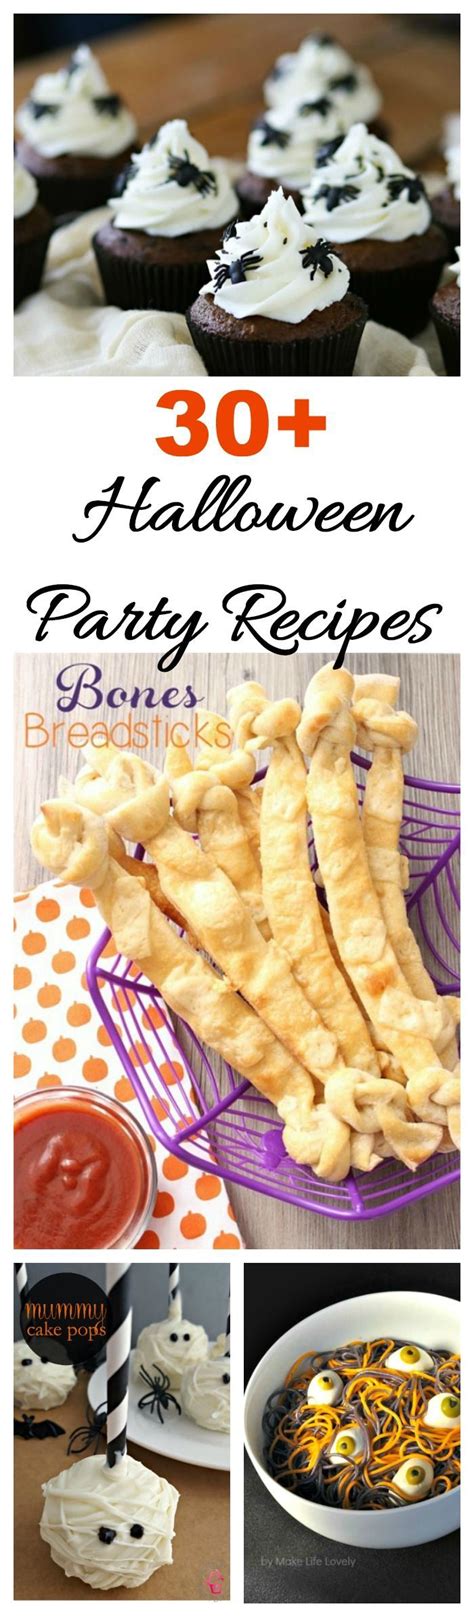 30 Halloween Party Recipes To Help You Celebrate In A Spooky Style